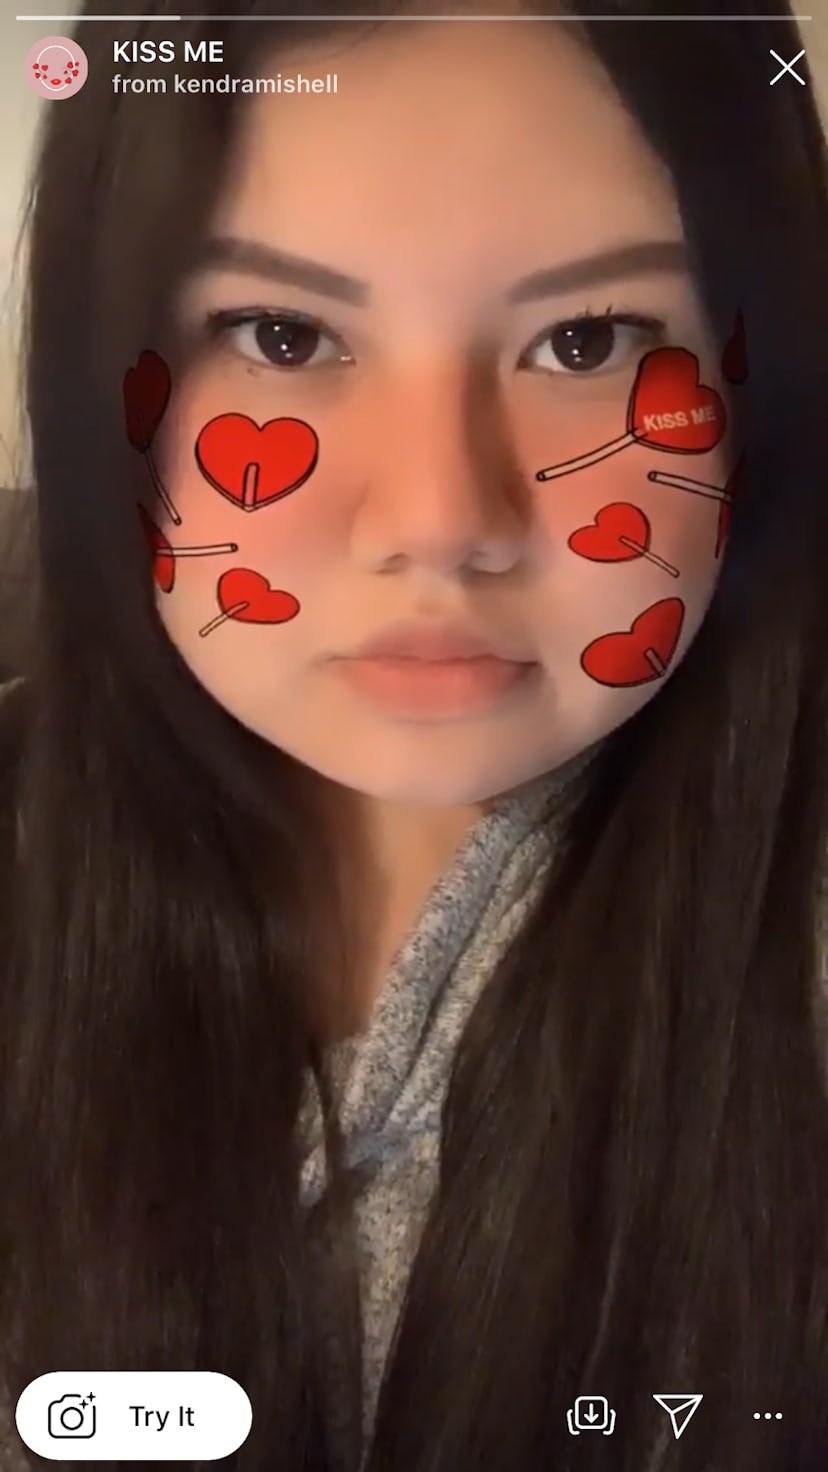 This AR filter for Valentine's Day lets you paint your face with "Kiss Me" lollipops. 